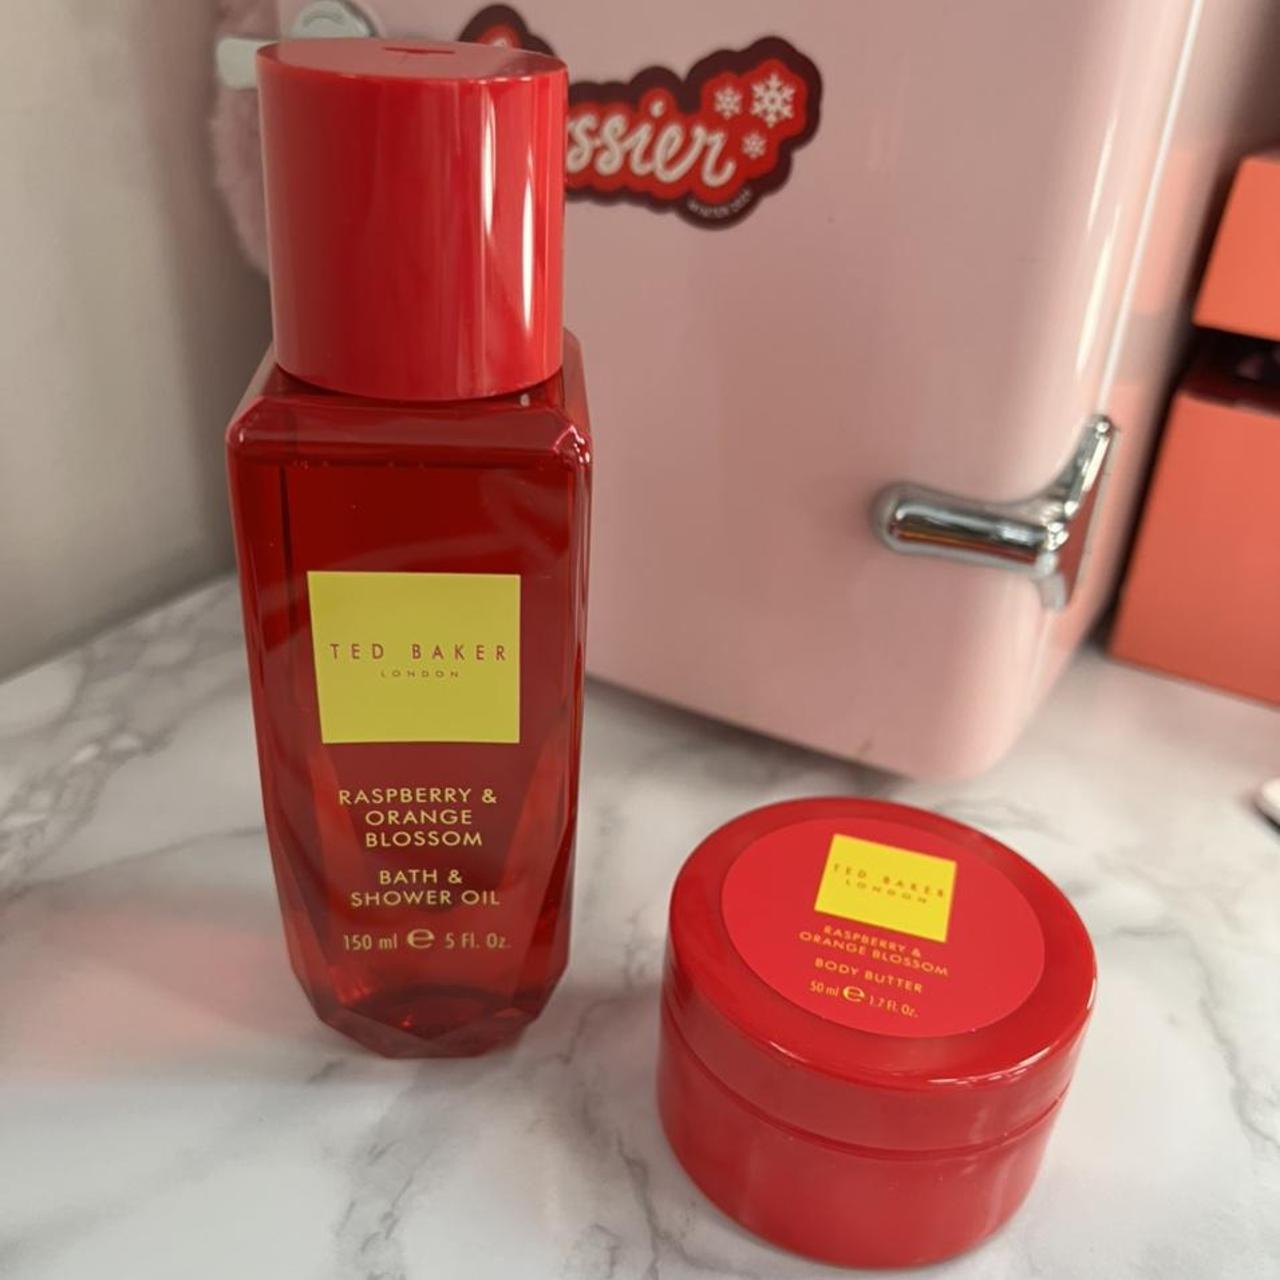 Ted Baker raspberry and orange blossom bath and... - Depop